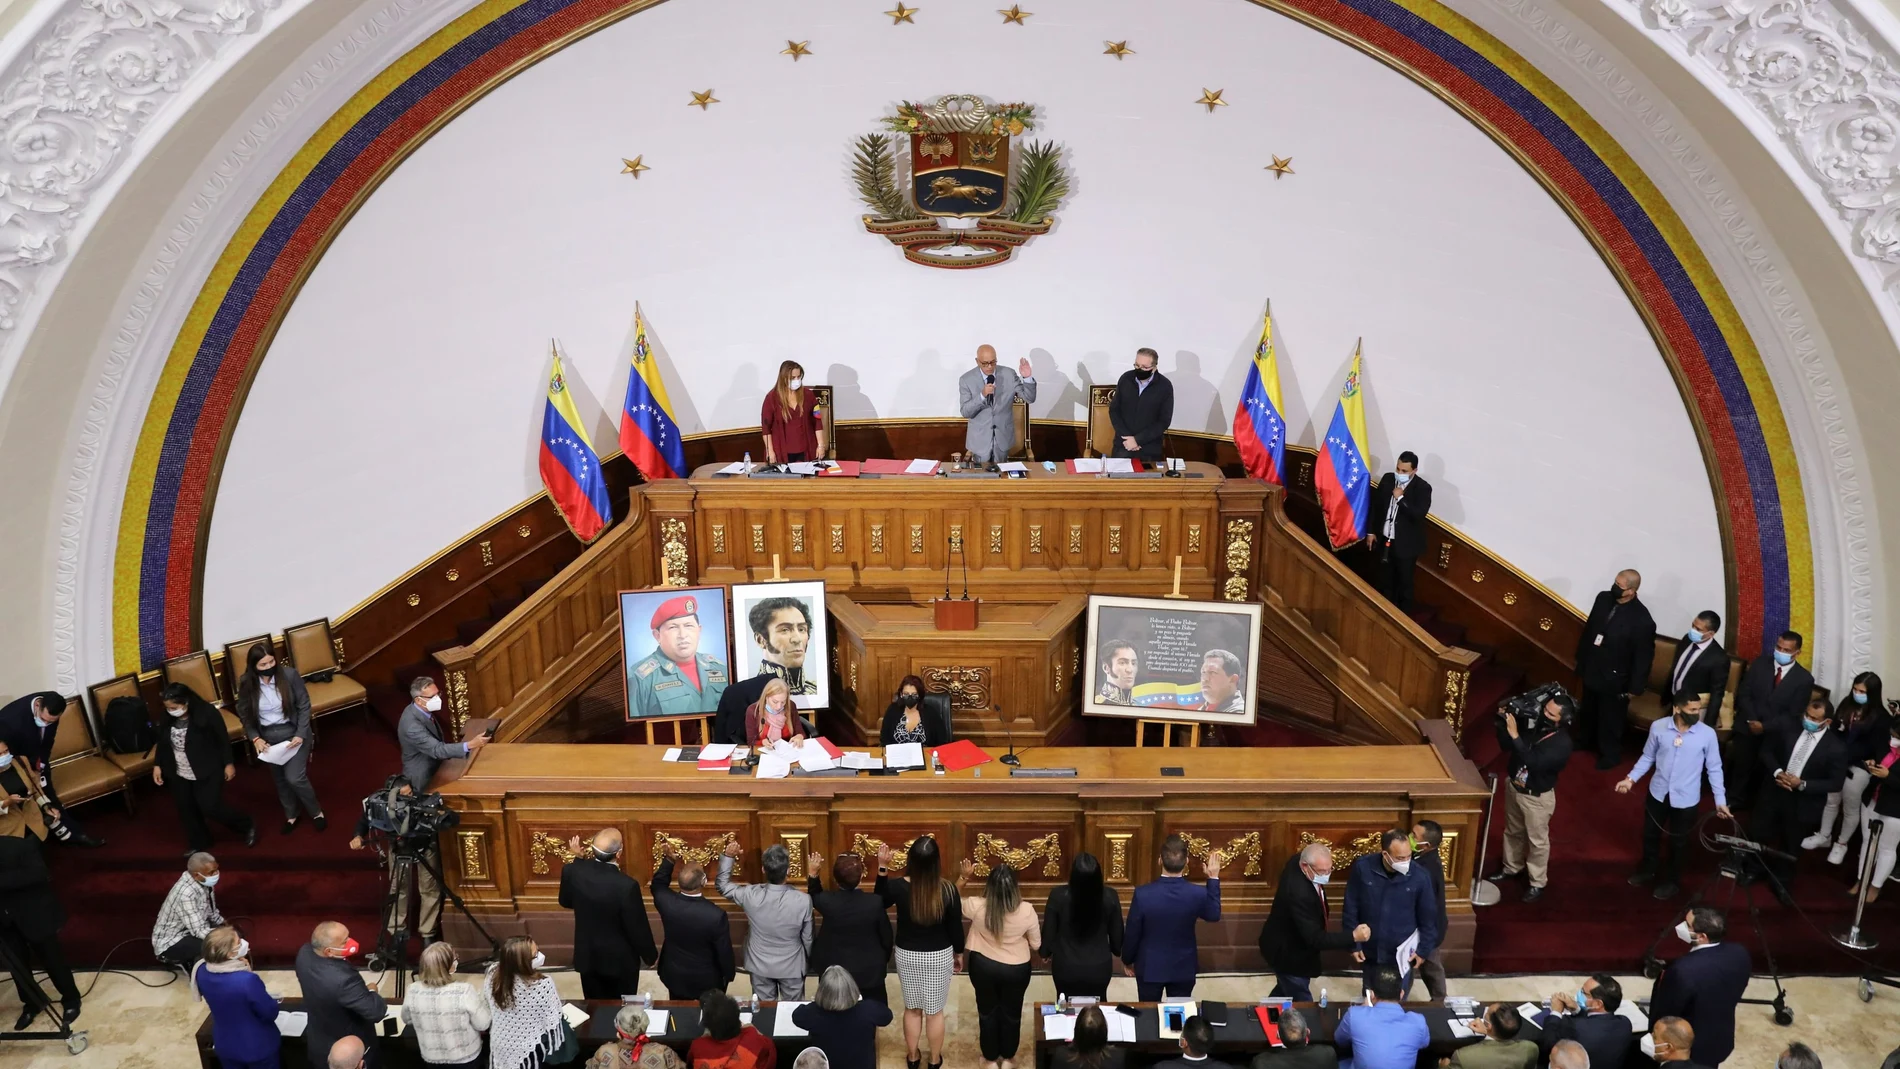 Venezuela's new National Assembly members raise their hands during a session in Caracas, Venezuela January 7, 2021. REUTERS/Manaure Quintero